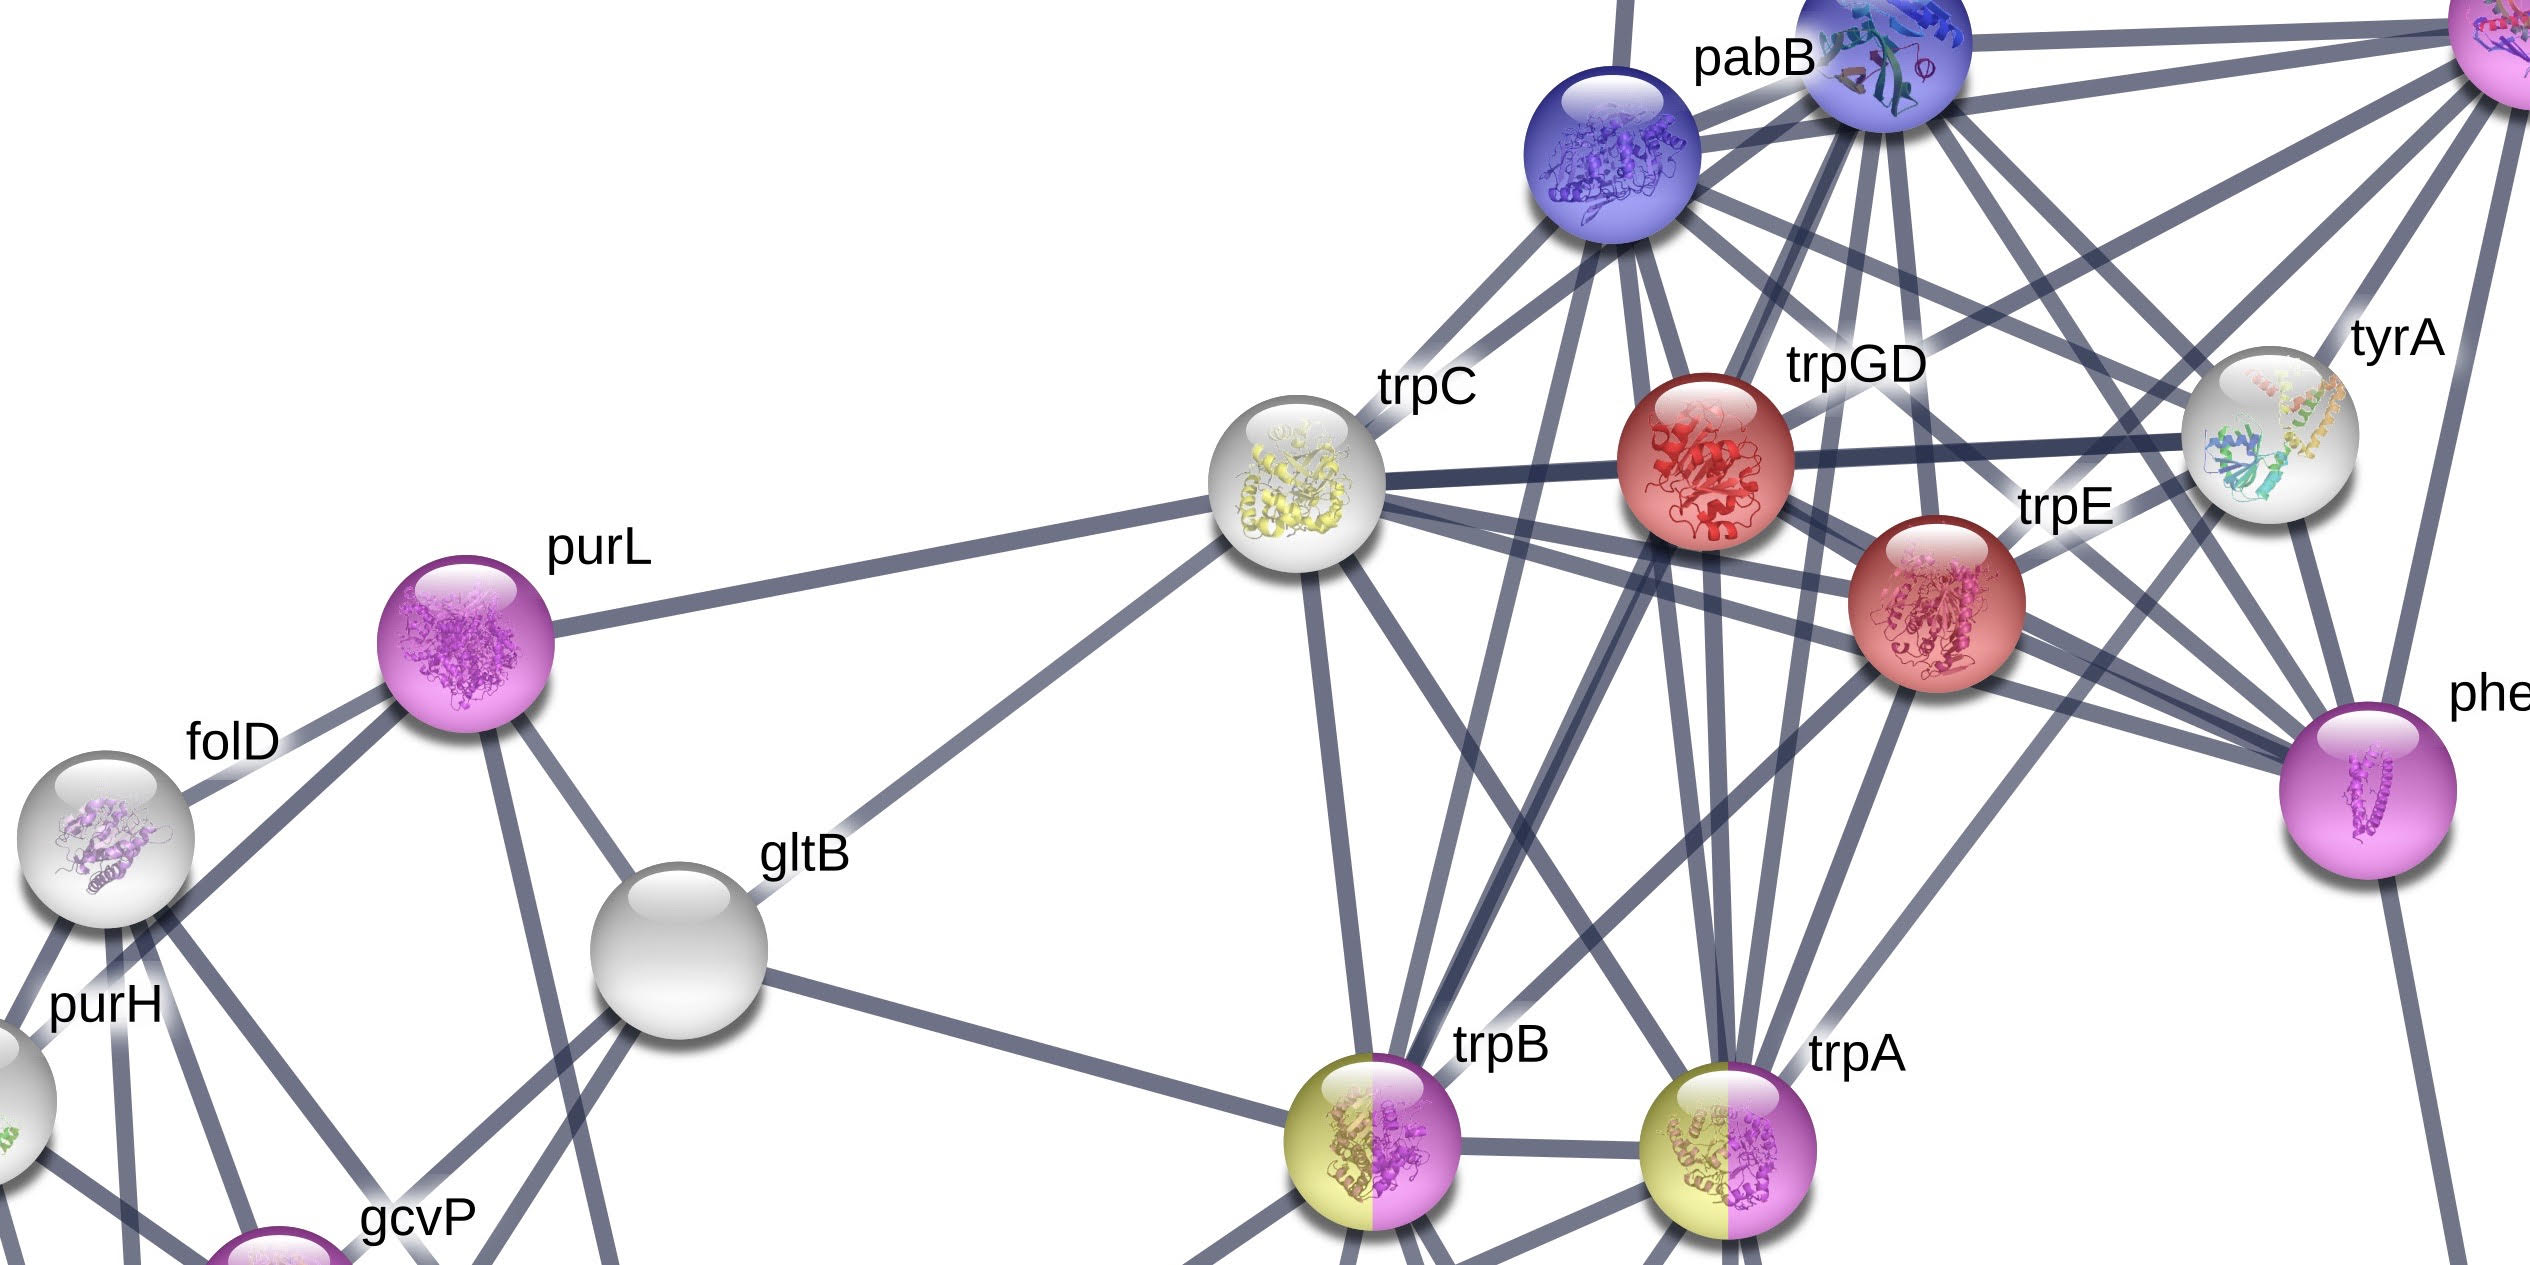 Protein networks